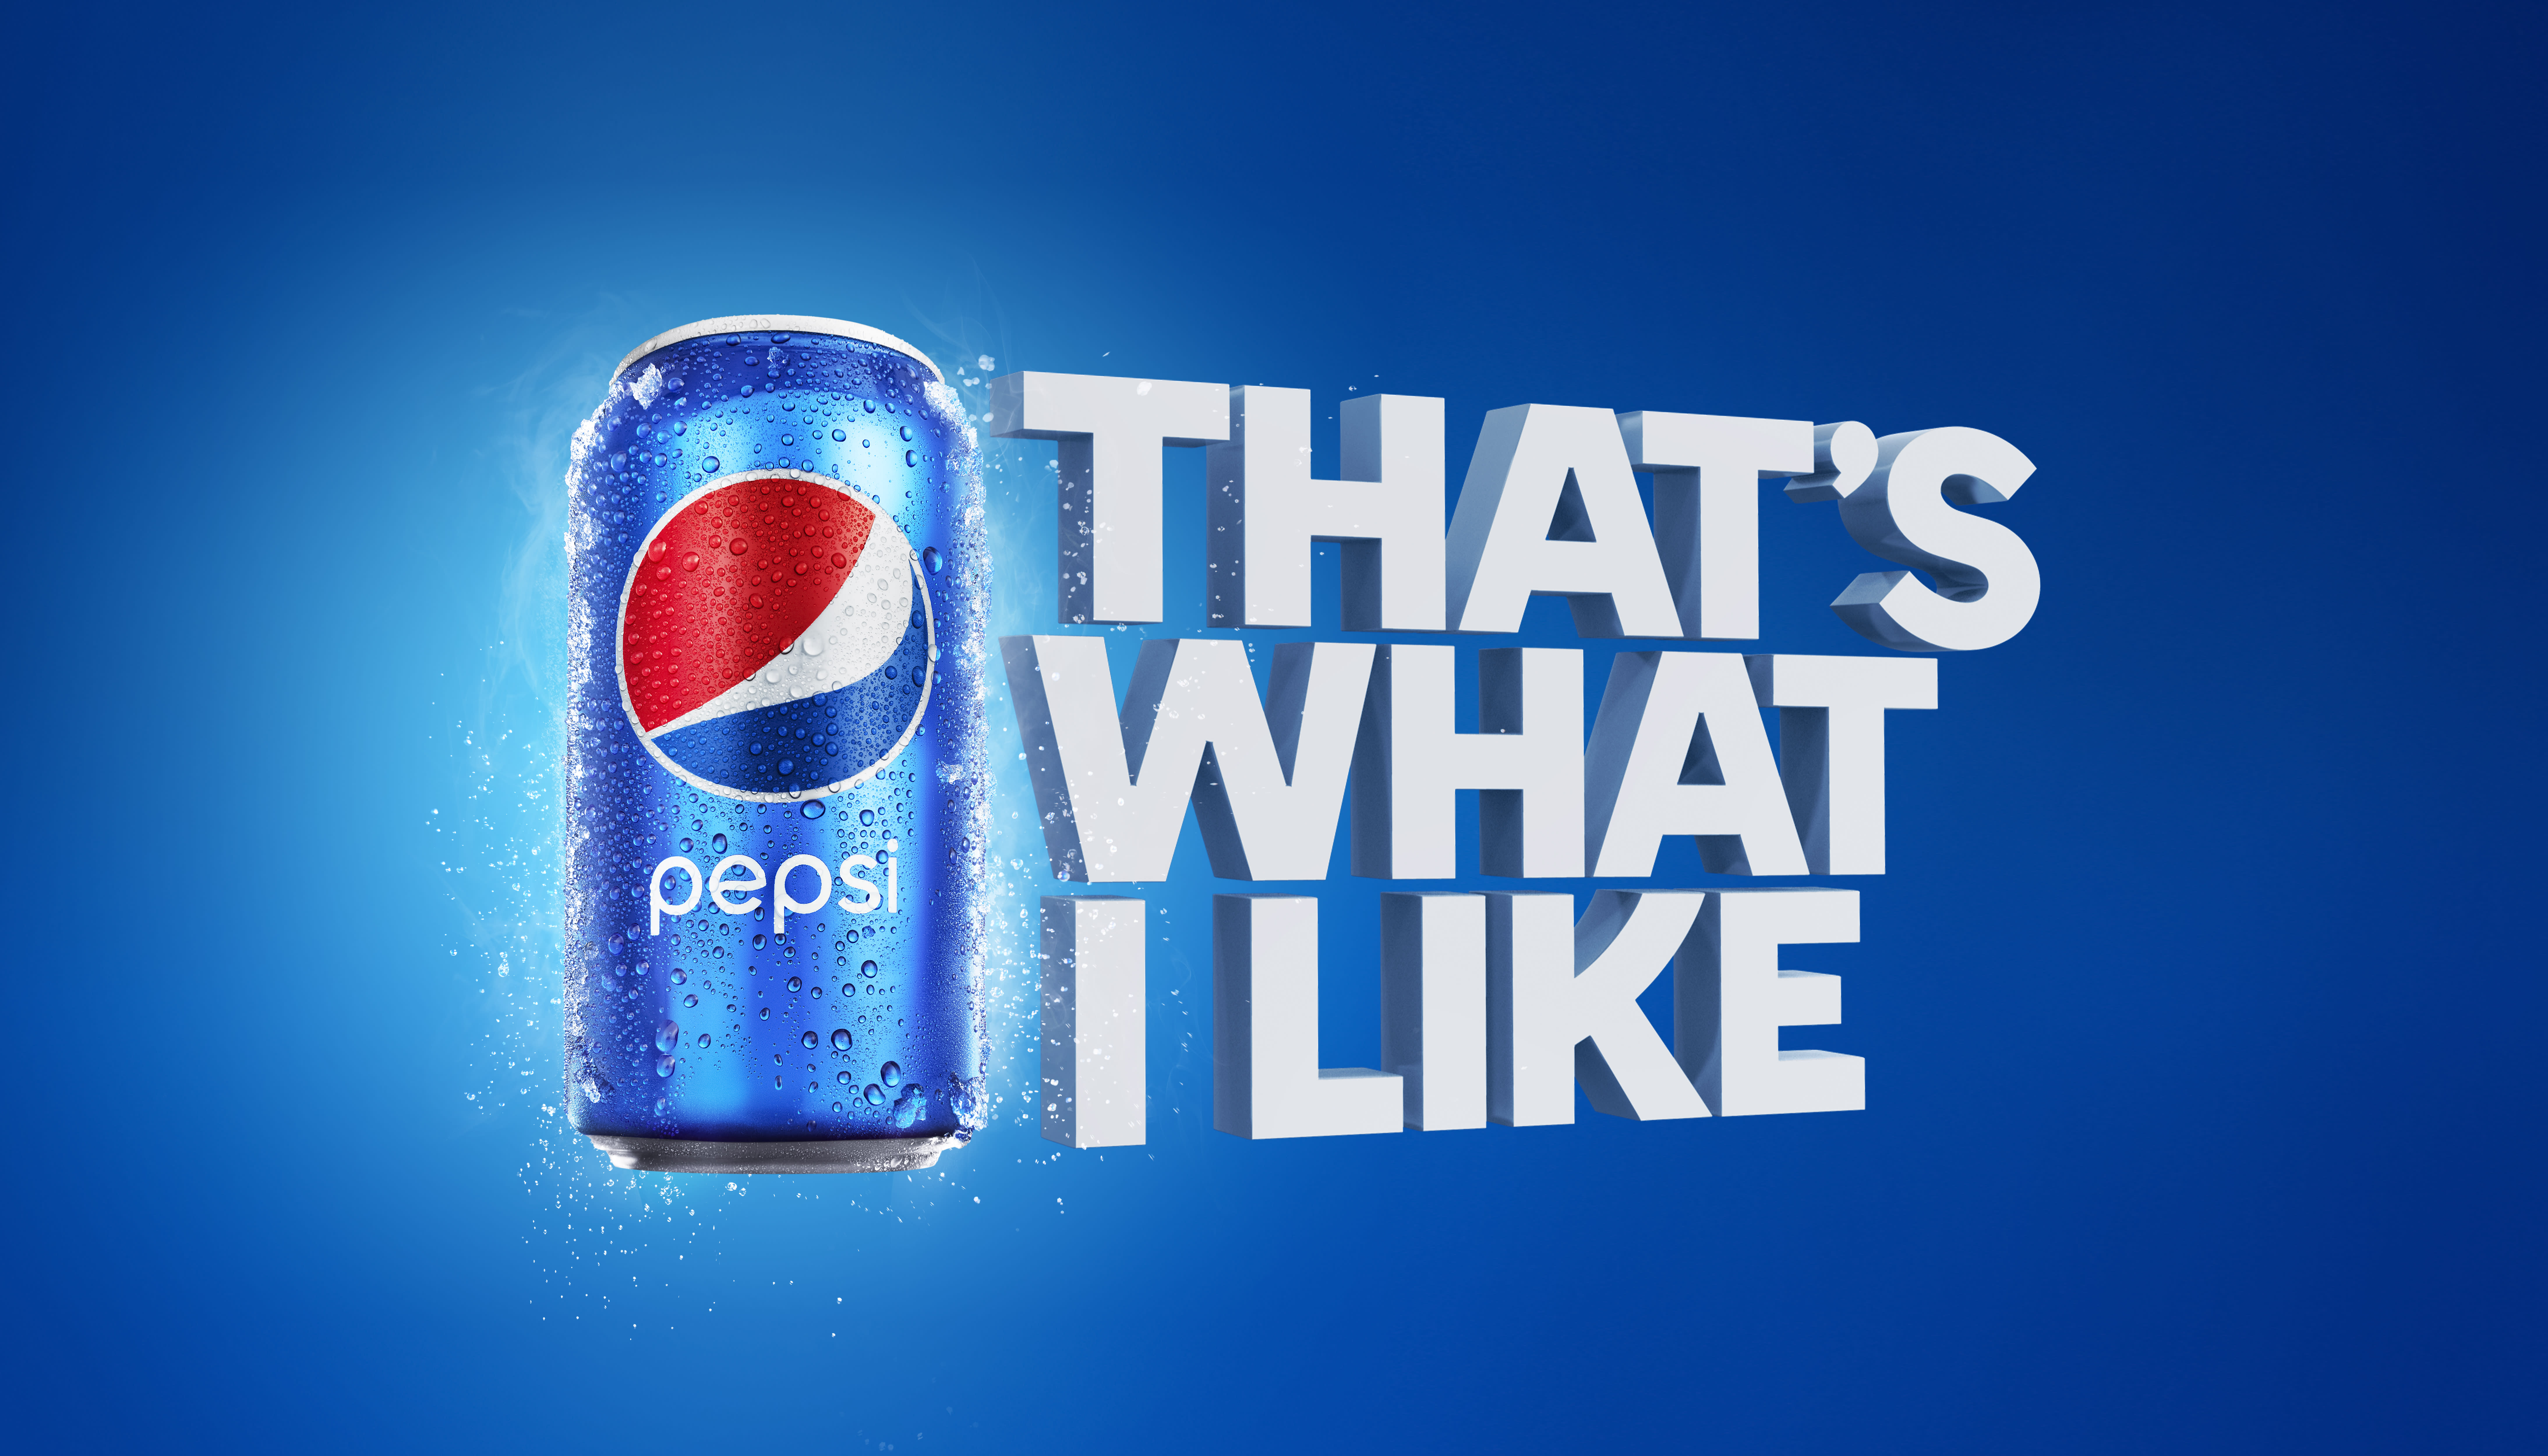 Pepsi’s Latest Ad Slogan Promotes Many Drinks, Not Just One